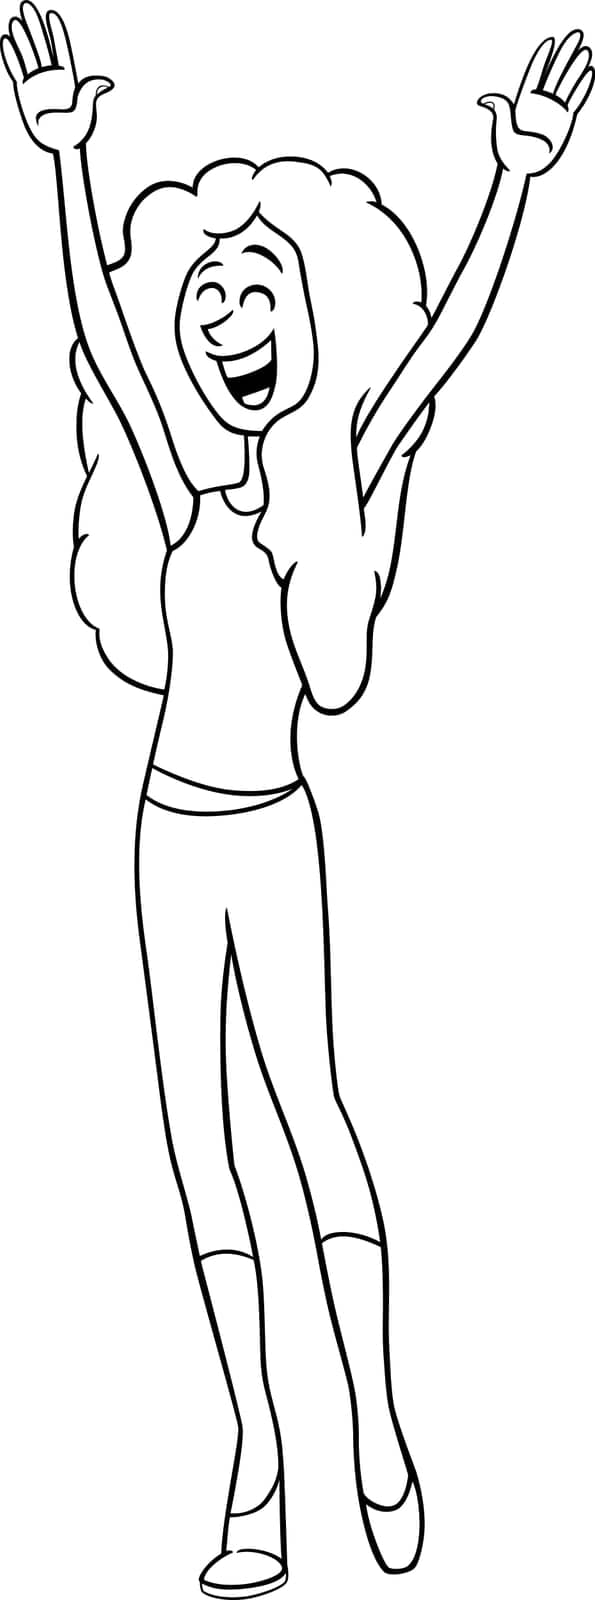 Cartoon illustration of happy girl or young woman comic character coloring page